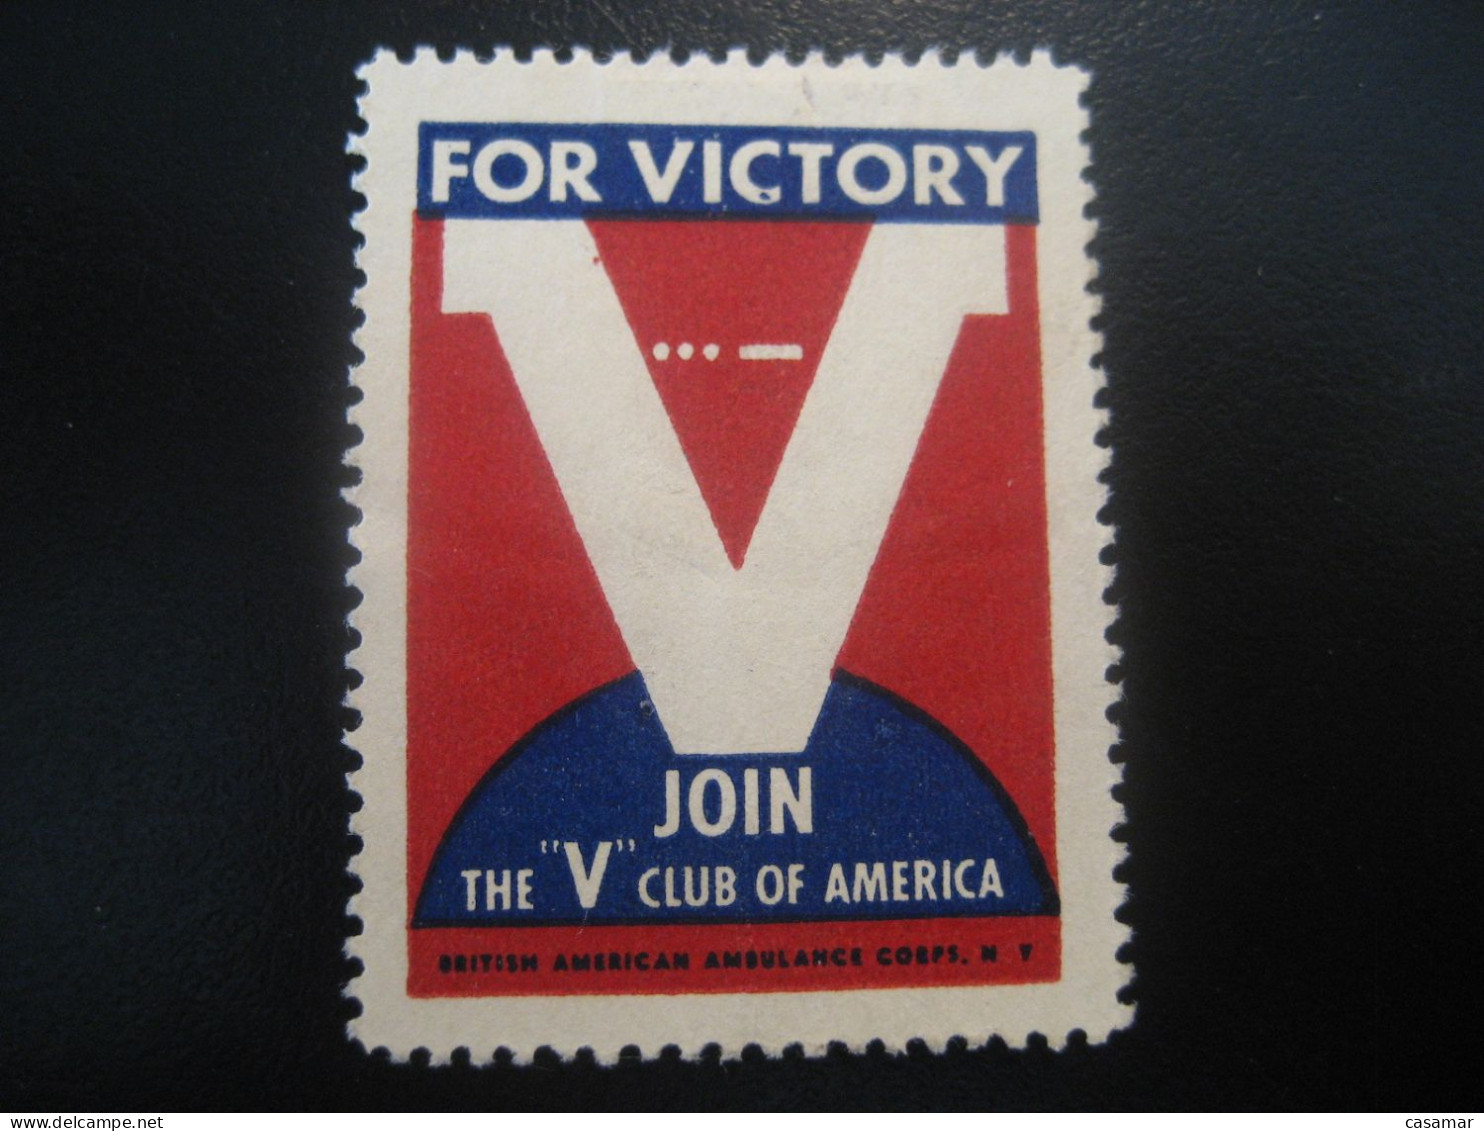 V For Victory Join The V Club Of America WW2 WWII Military War Poster Stamp Vignette USA Label - Guerre Mondiale (Seconde)